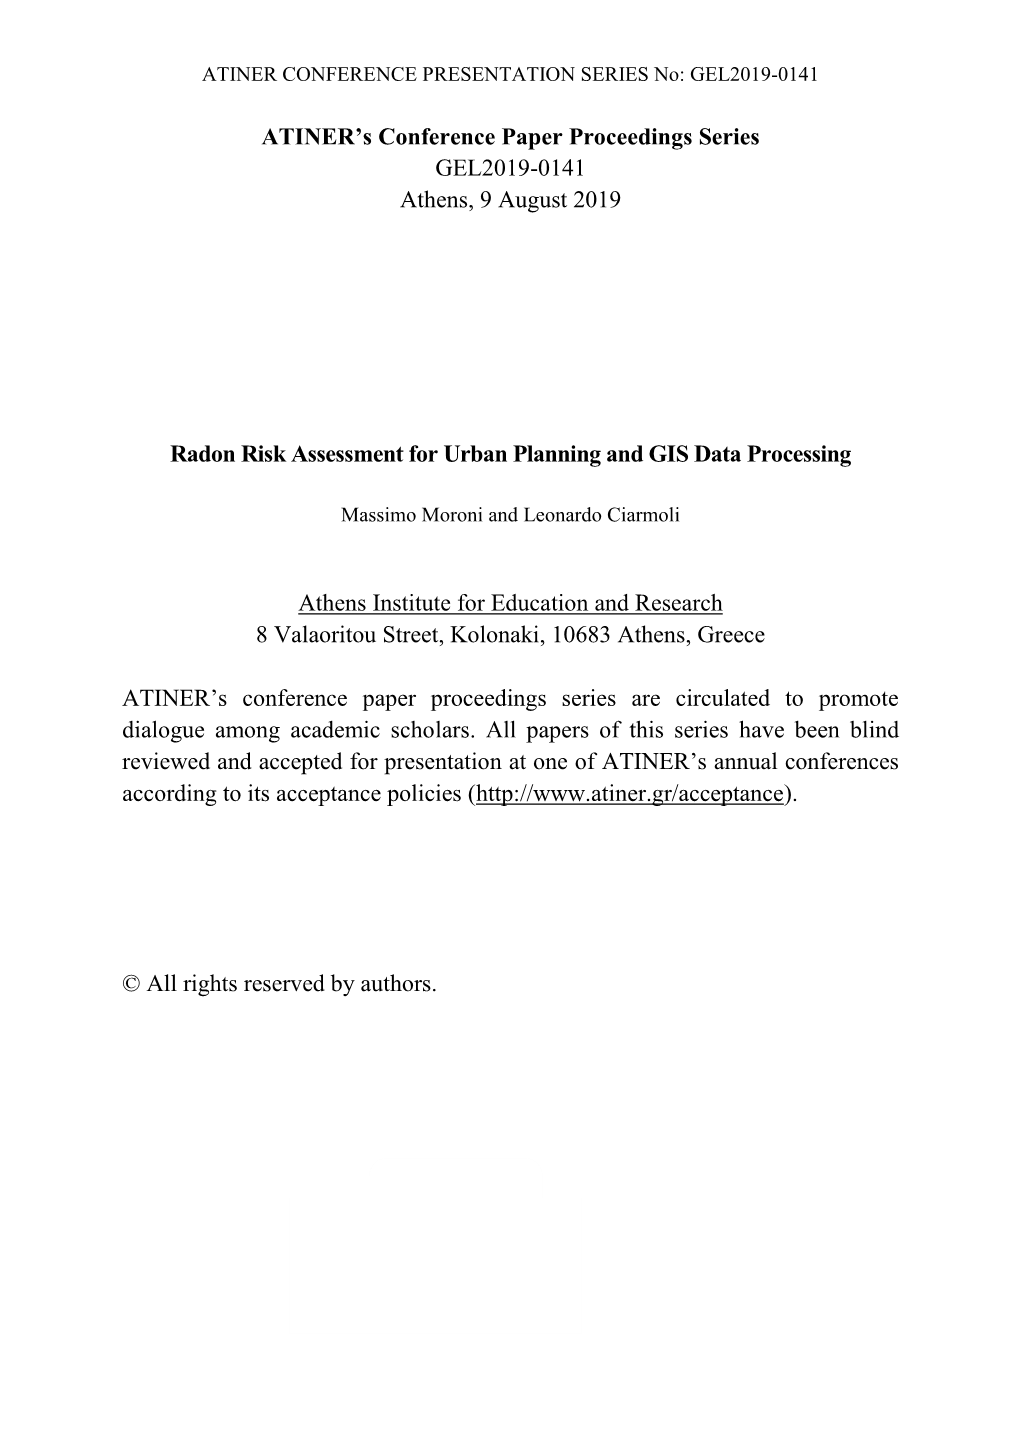 ATINER's Conference Paper Proceedings Series GEL2019-0141 Athens, 9 August 2019 Radon Risk Assessment for Urban Planning and G